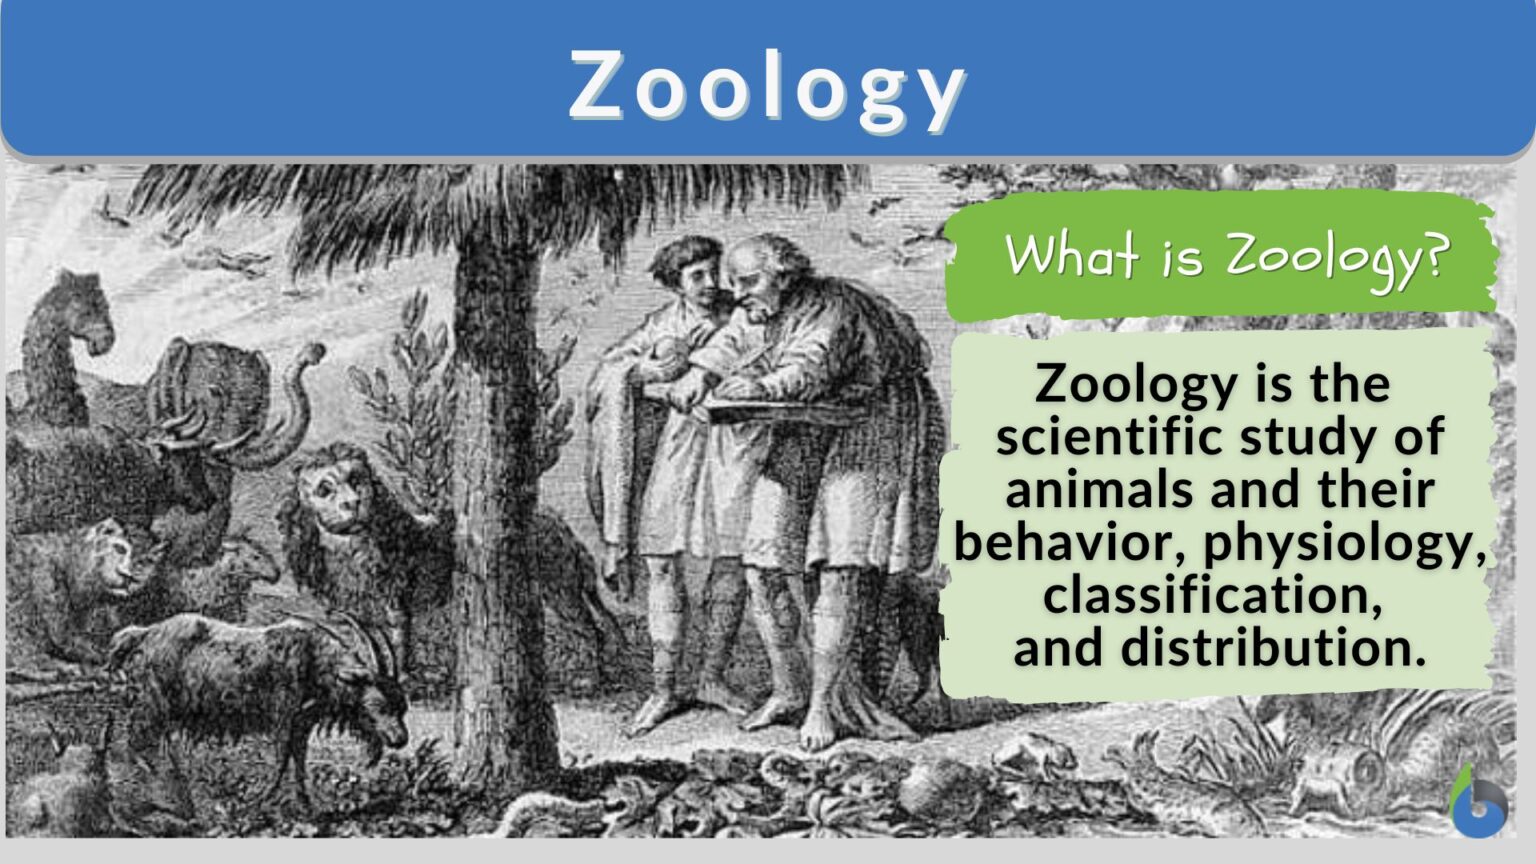 what is zoology thesis